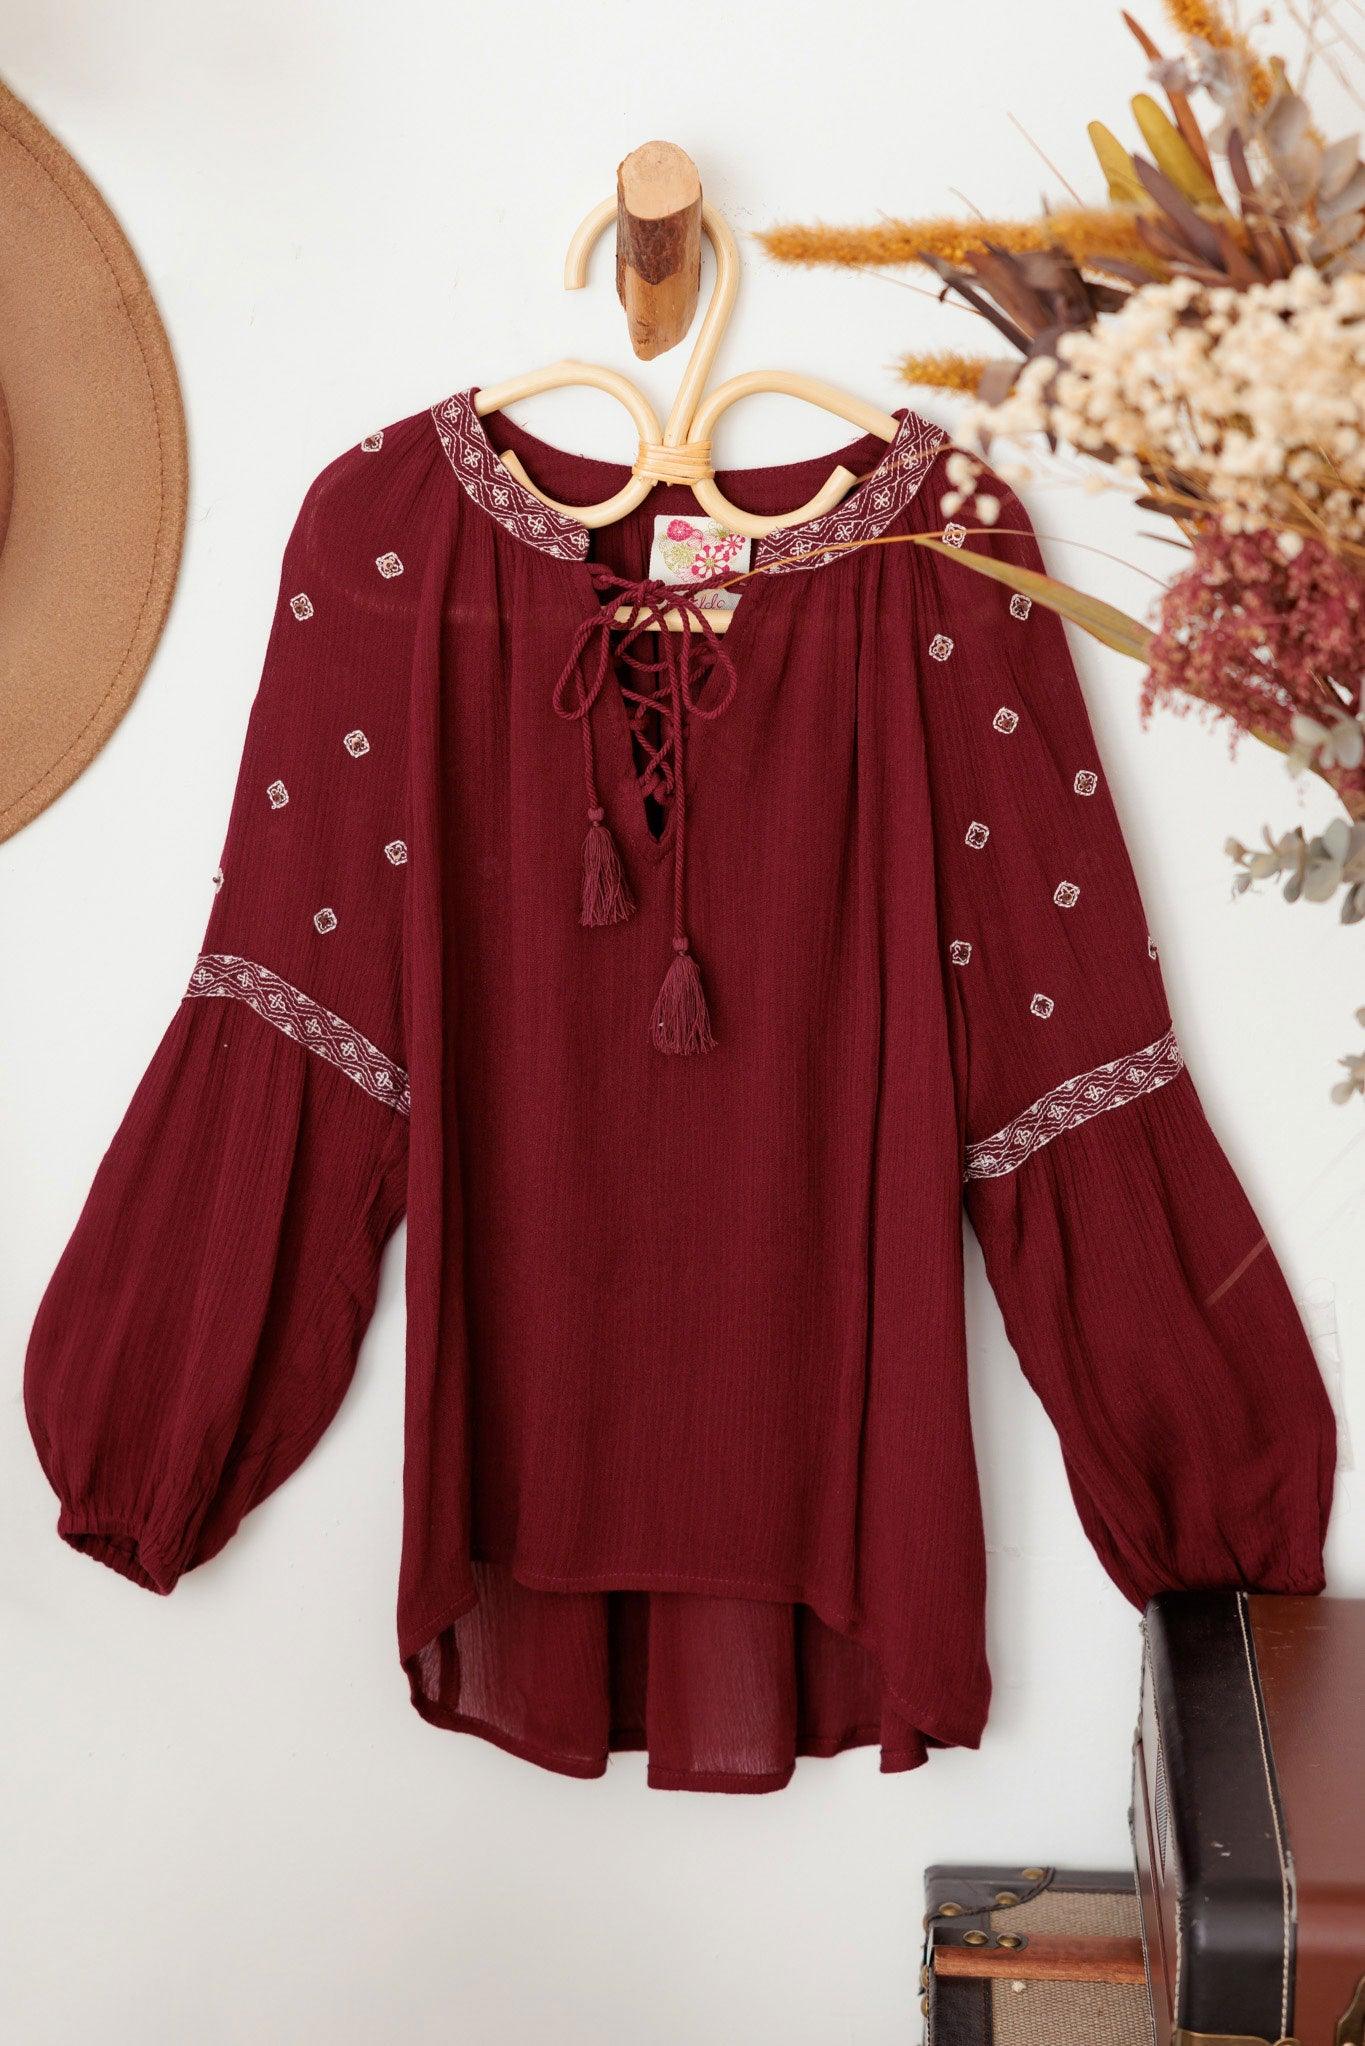 Girls Ethnic Boho Embroidered Front Tie Top